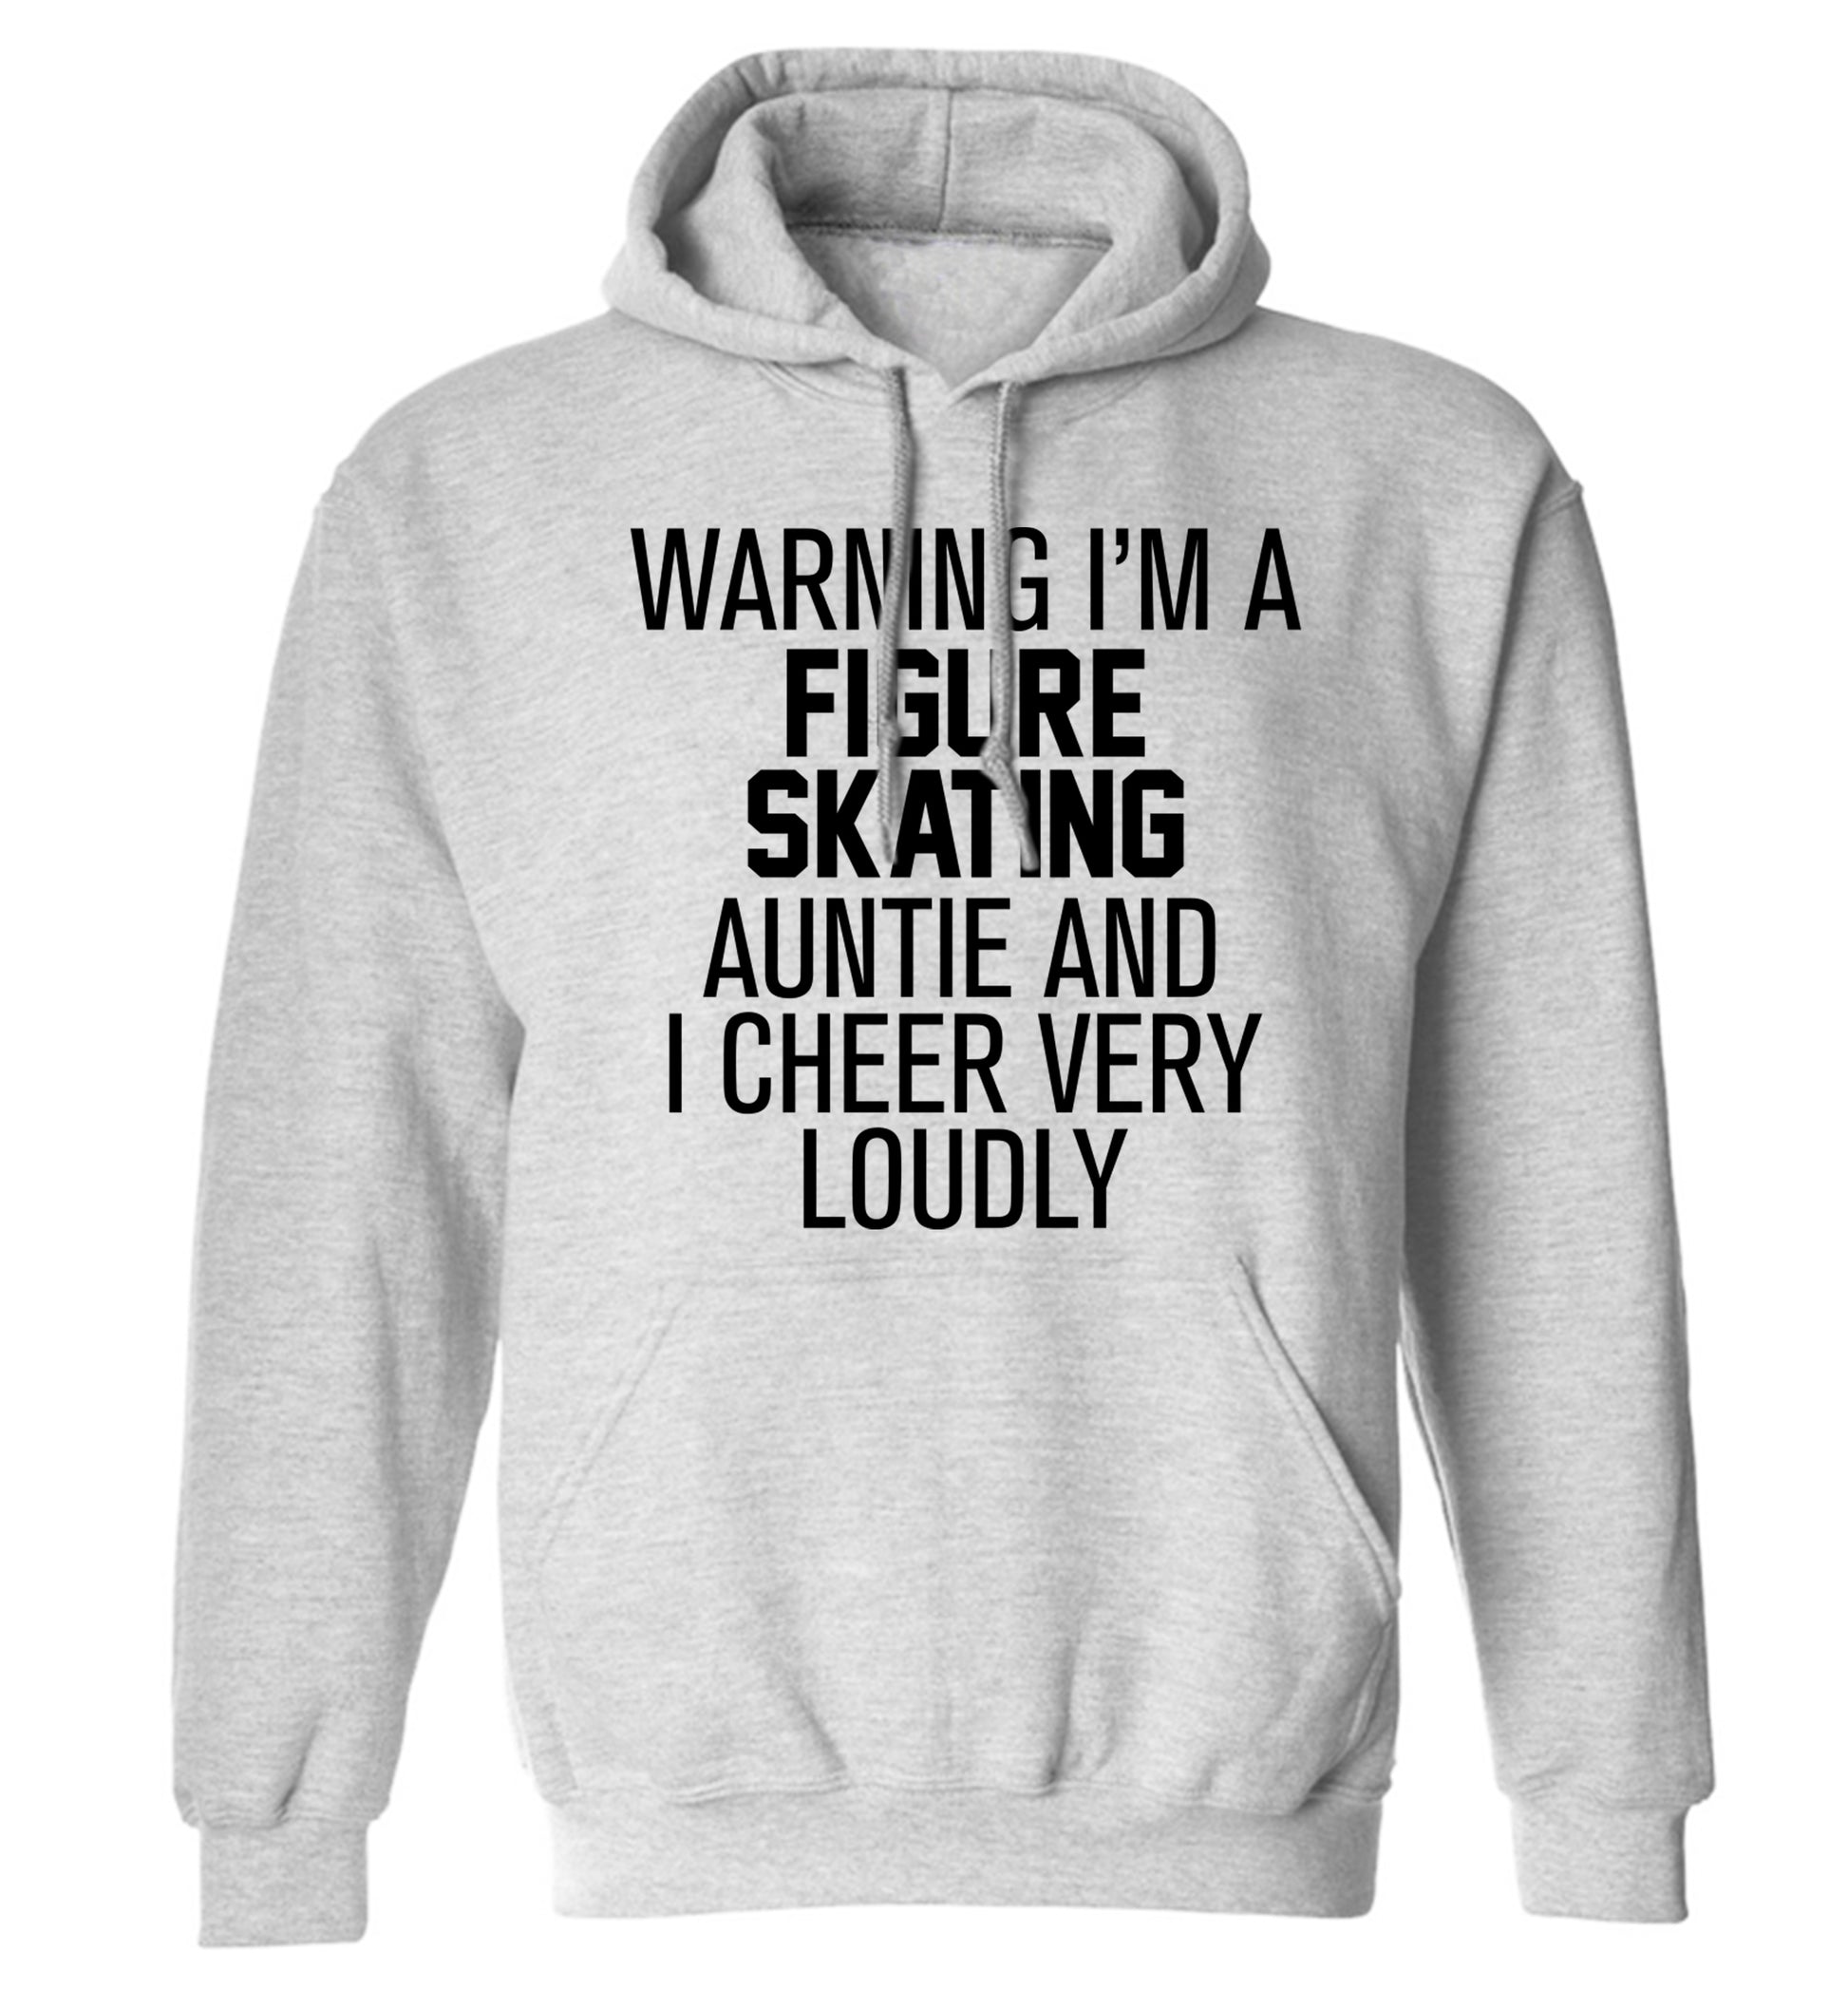 Warning I'm a figure skating auntie and I cheer very loudly adults unisexgrey hoodie 2XL